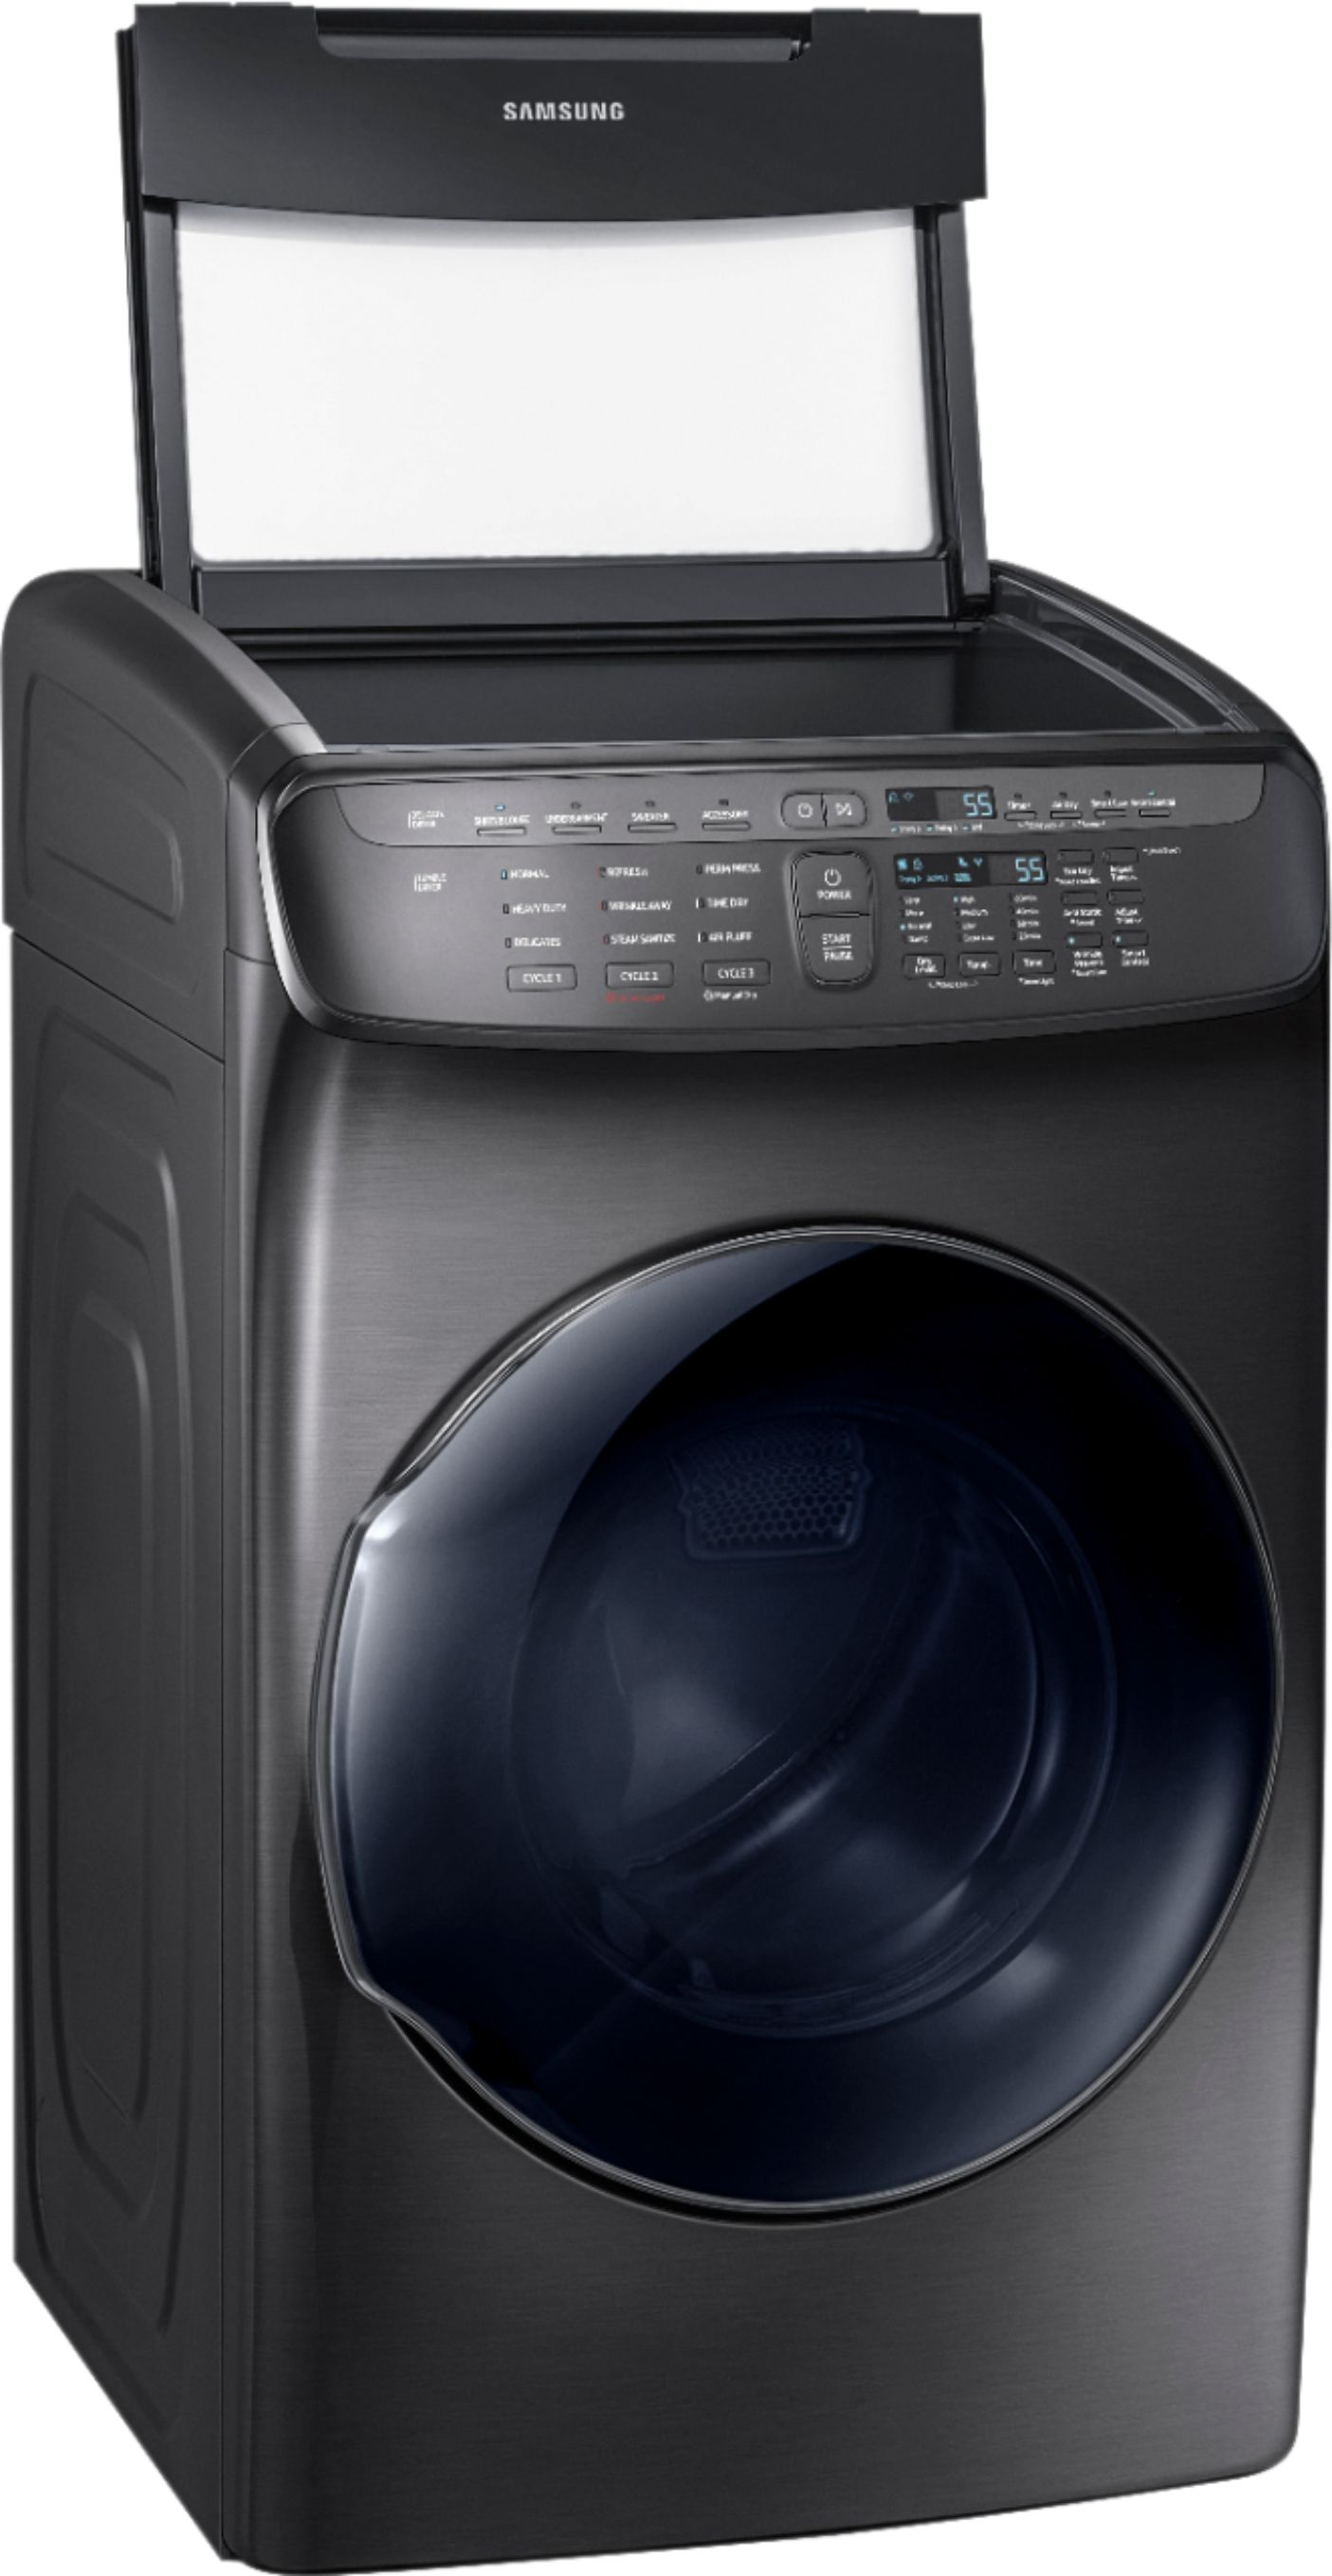 Angle View: Samsung - 7.5 Cu. Ft. Smart Electric Dryer with Steam and FlexDry™ - Black stainless steel